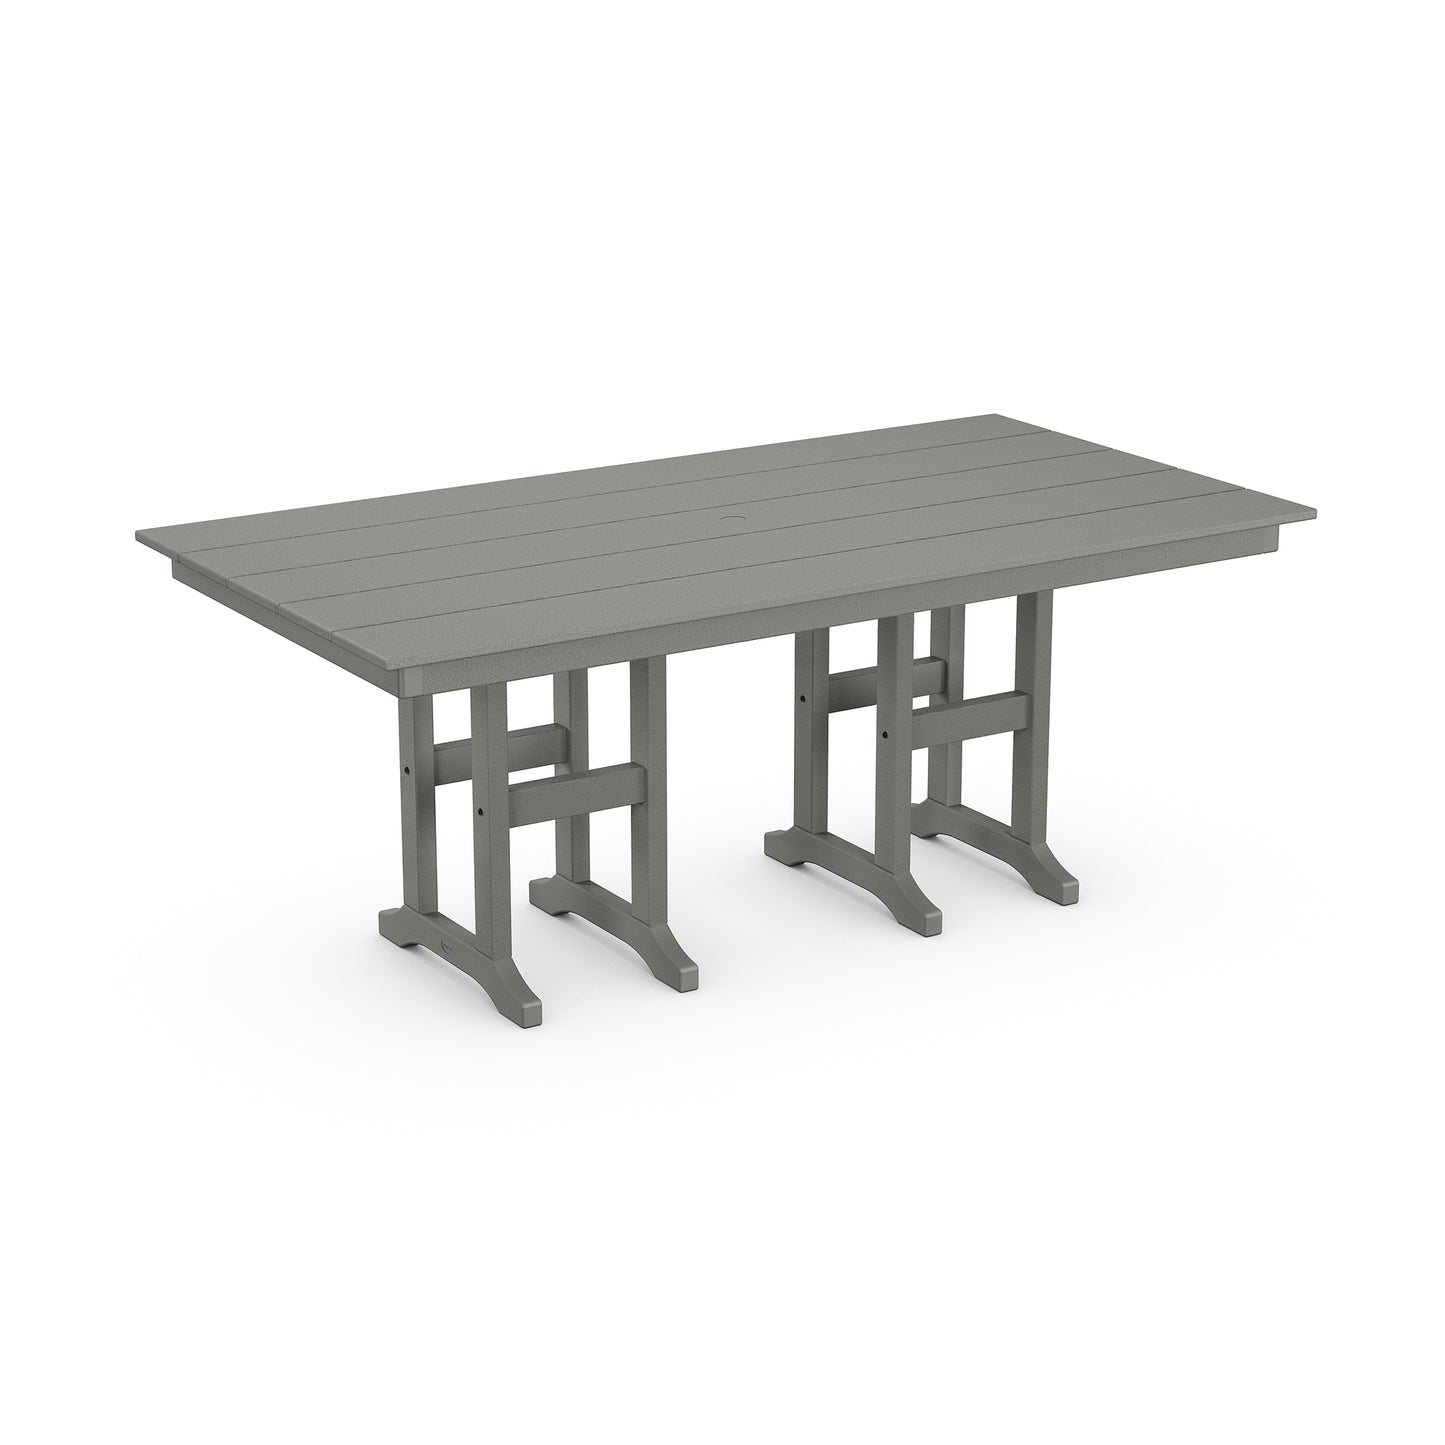 A 3D rendering of a large gray outdoor picnic table made of weather-resistant POLYWOOD lumber, featuring attached benches on either side. The table is set against a plain white background.